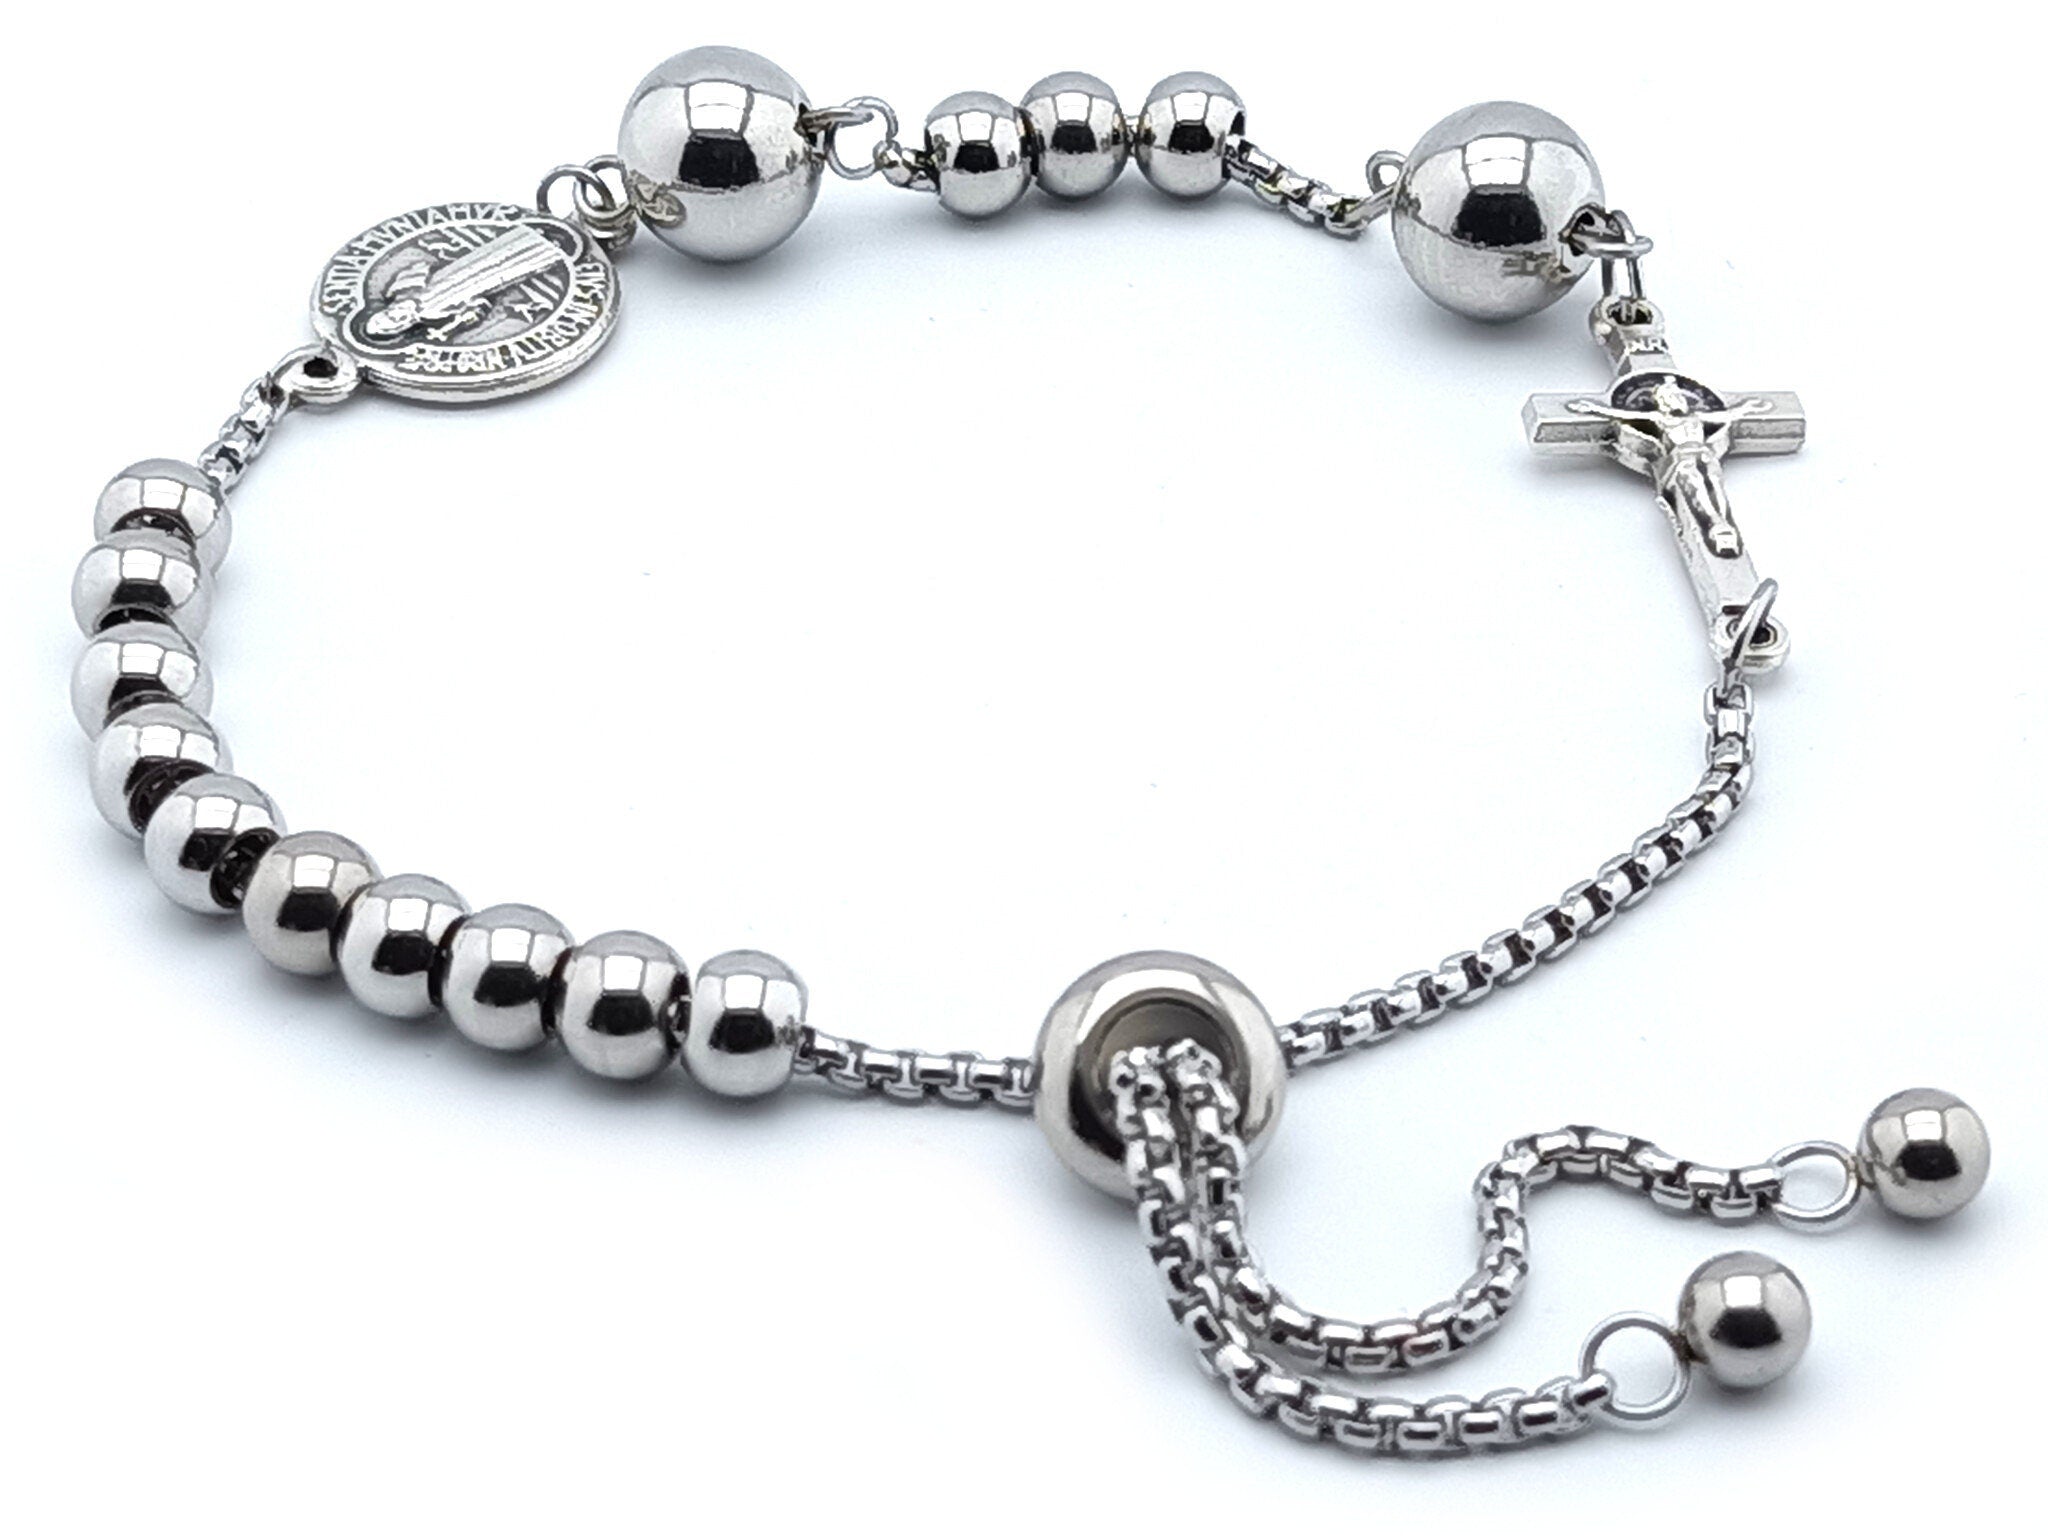 Rosary Bracelets from The Vatican | MONDO CATTOLICO